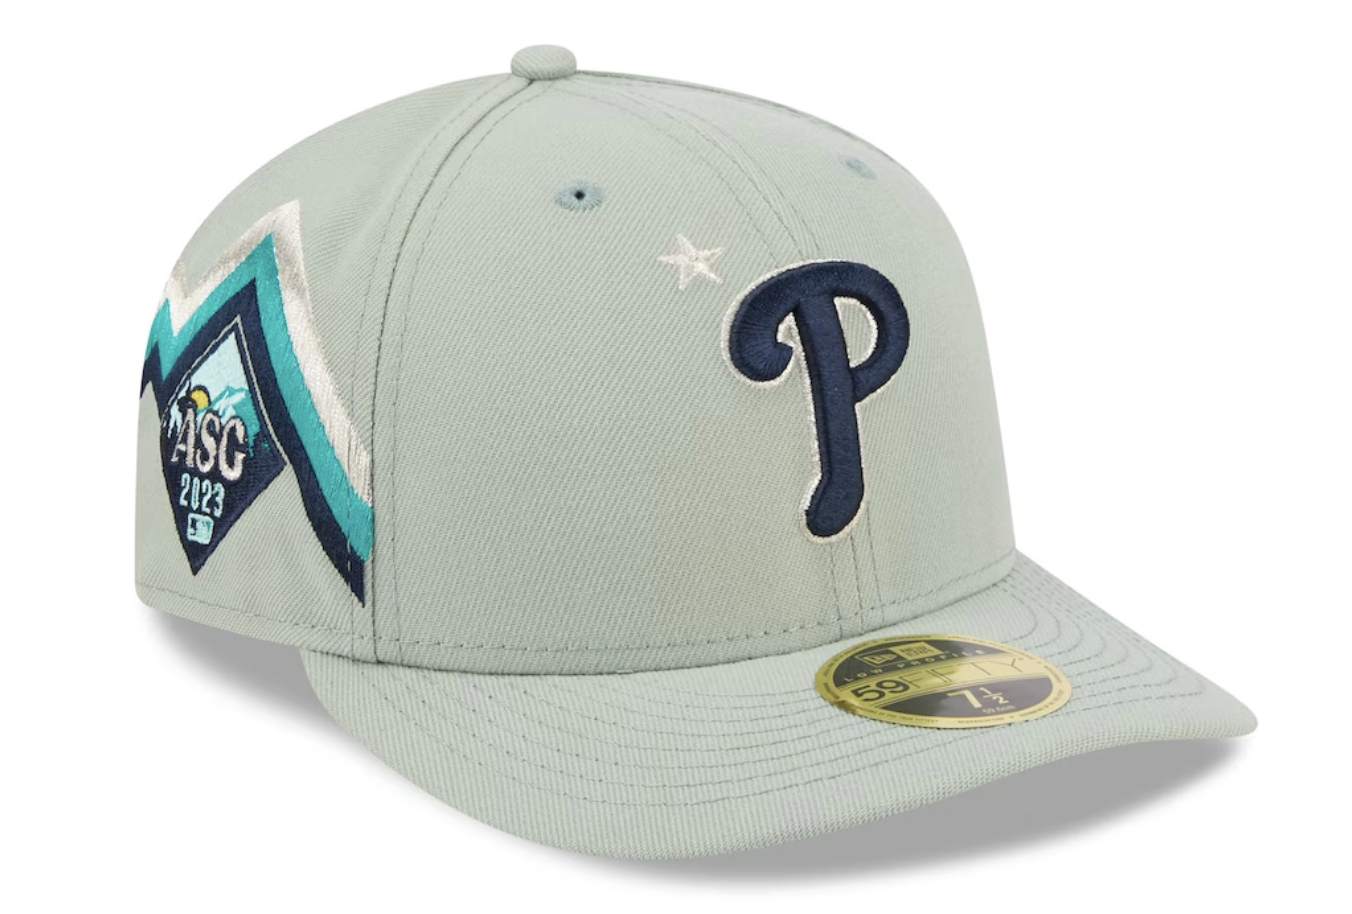 MLB All-Star Game 2019 gear released: How to buy Yankees, Mets, Phillies,  other All-Star jerseys, hats 